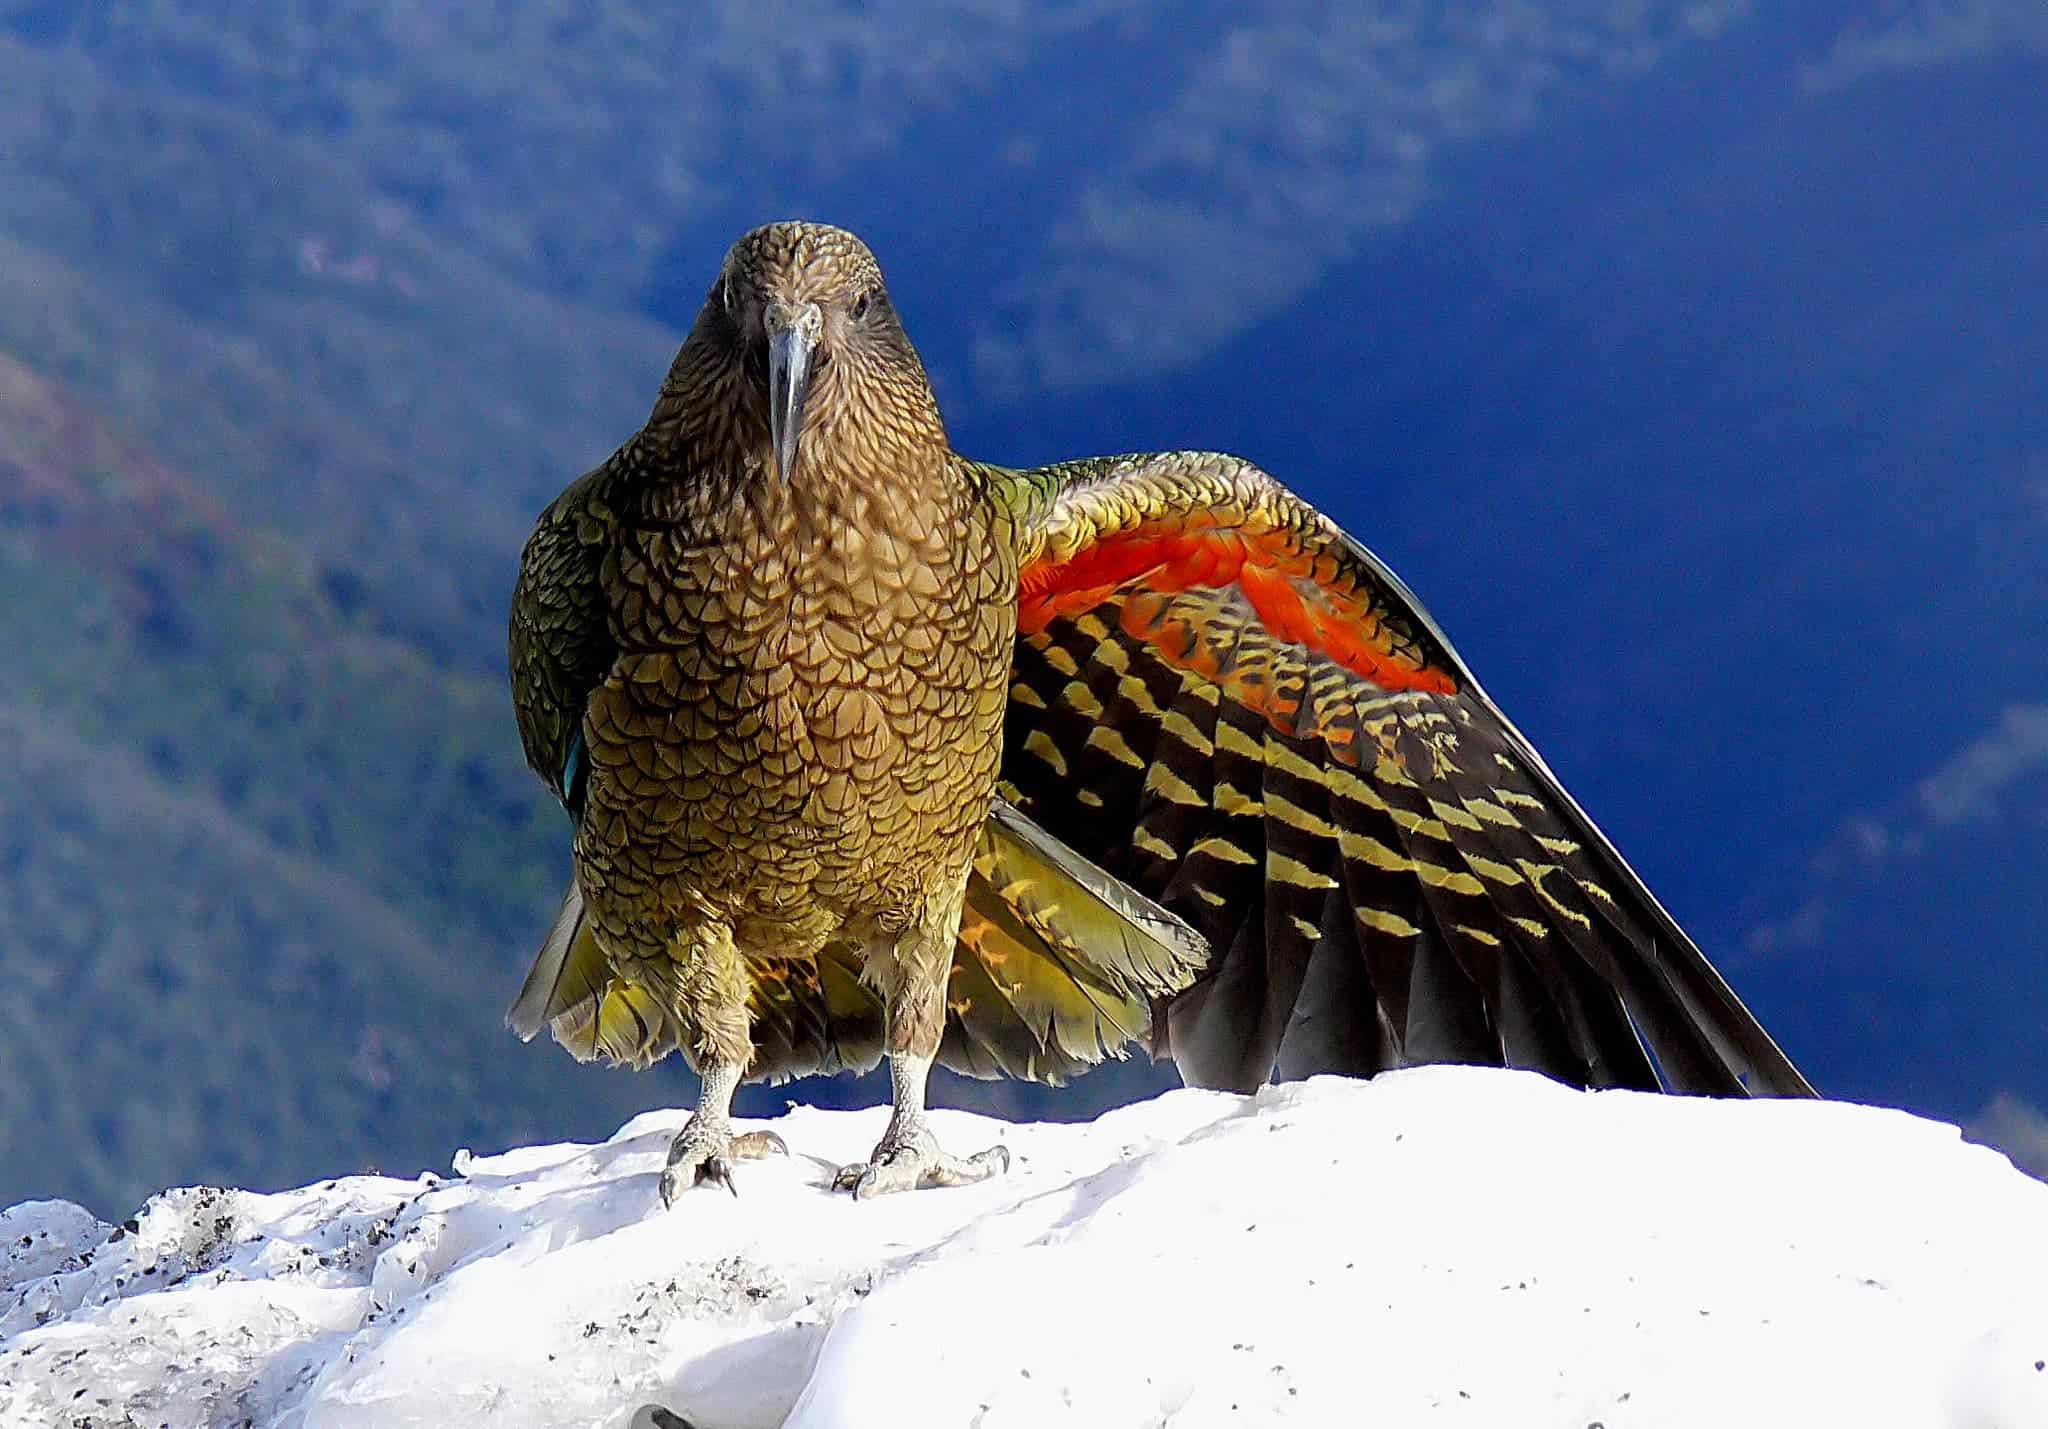 The New Zealand kea is an endemic parrot found in the South Island's alpine environments. As many as 5,000 and as little as 1,000 individuals are believe to exist in the wild. Credit: Bernard Spragg. Flickr.